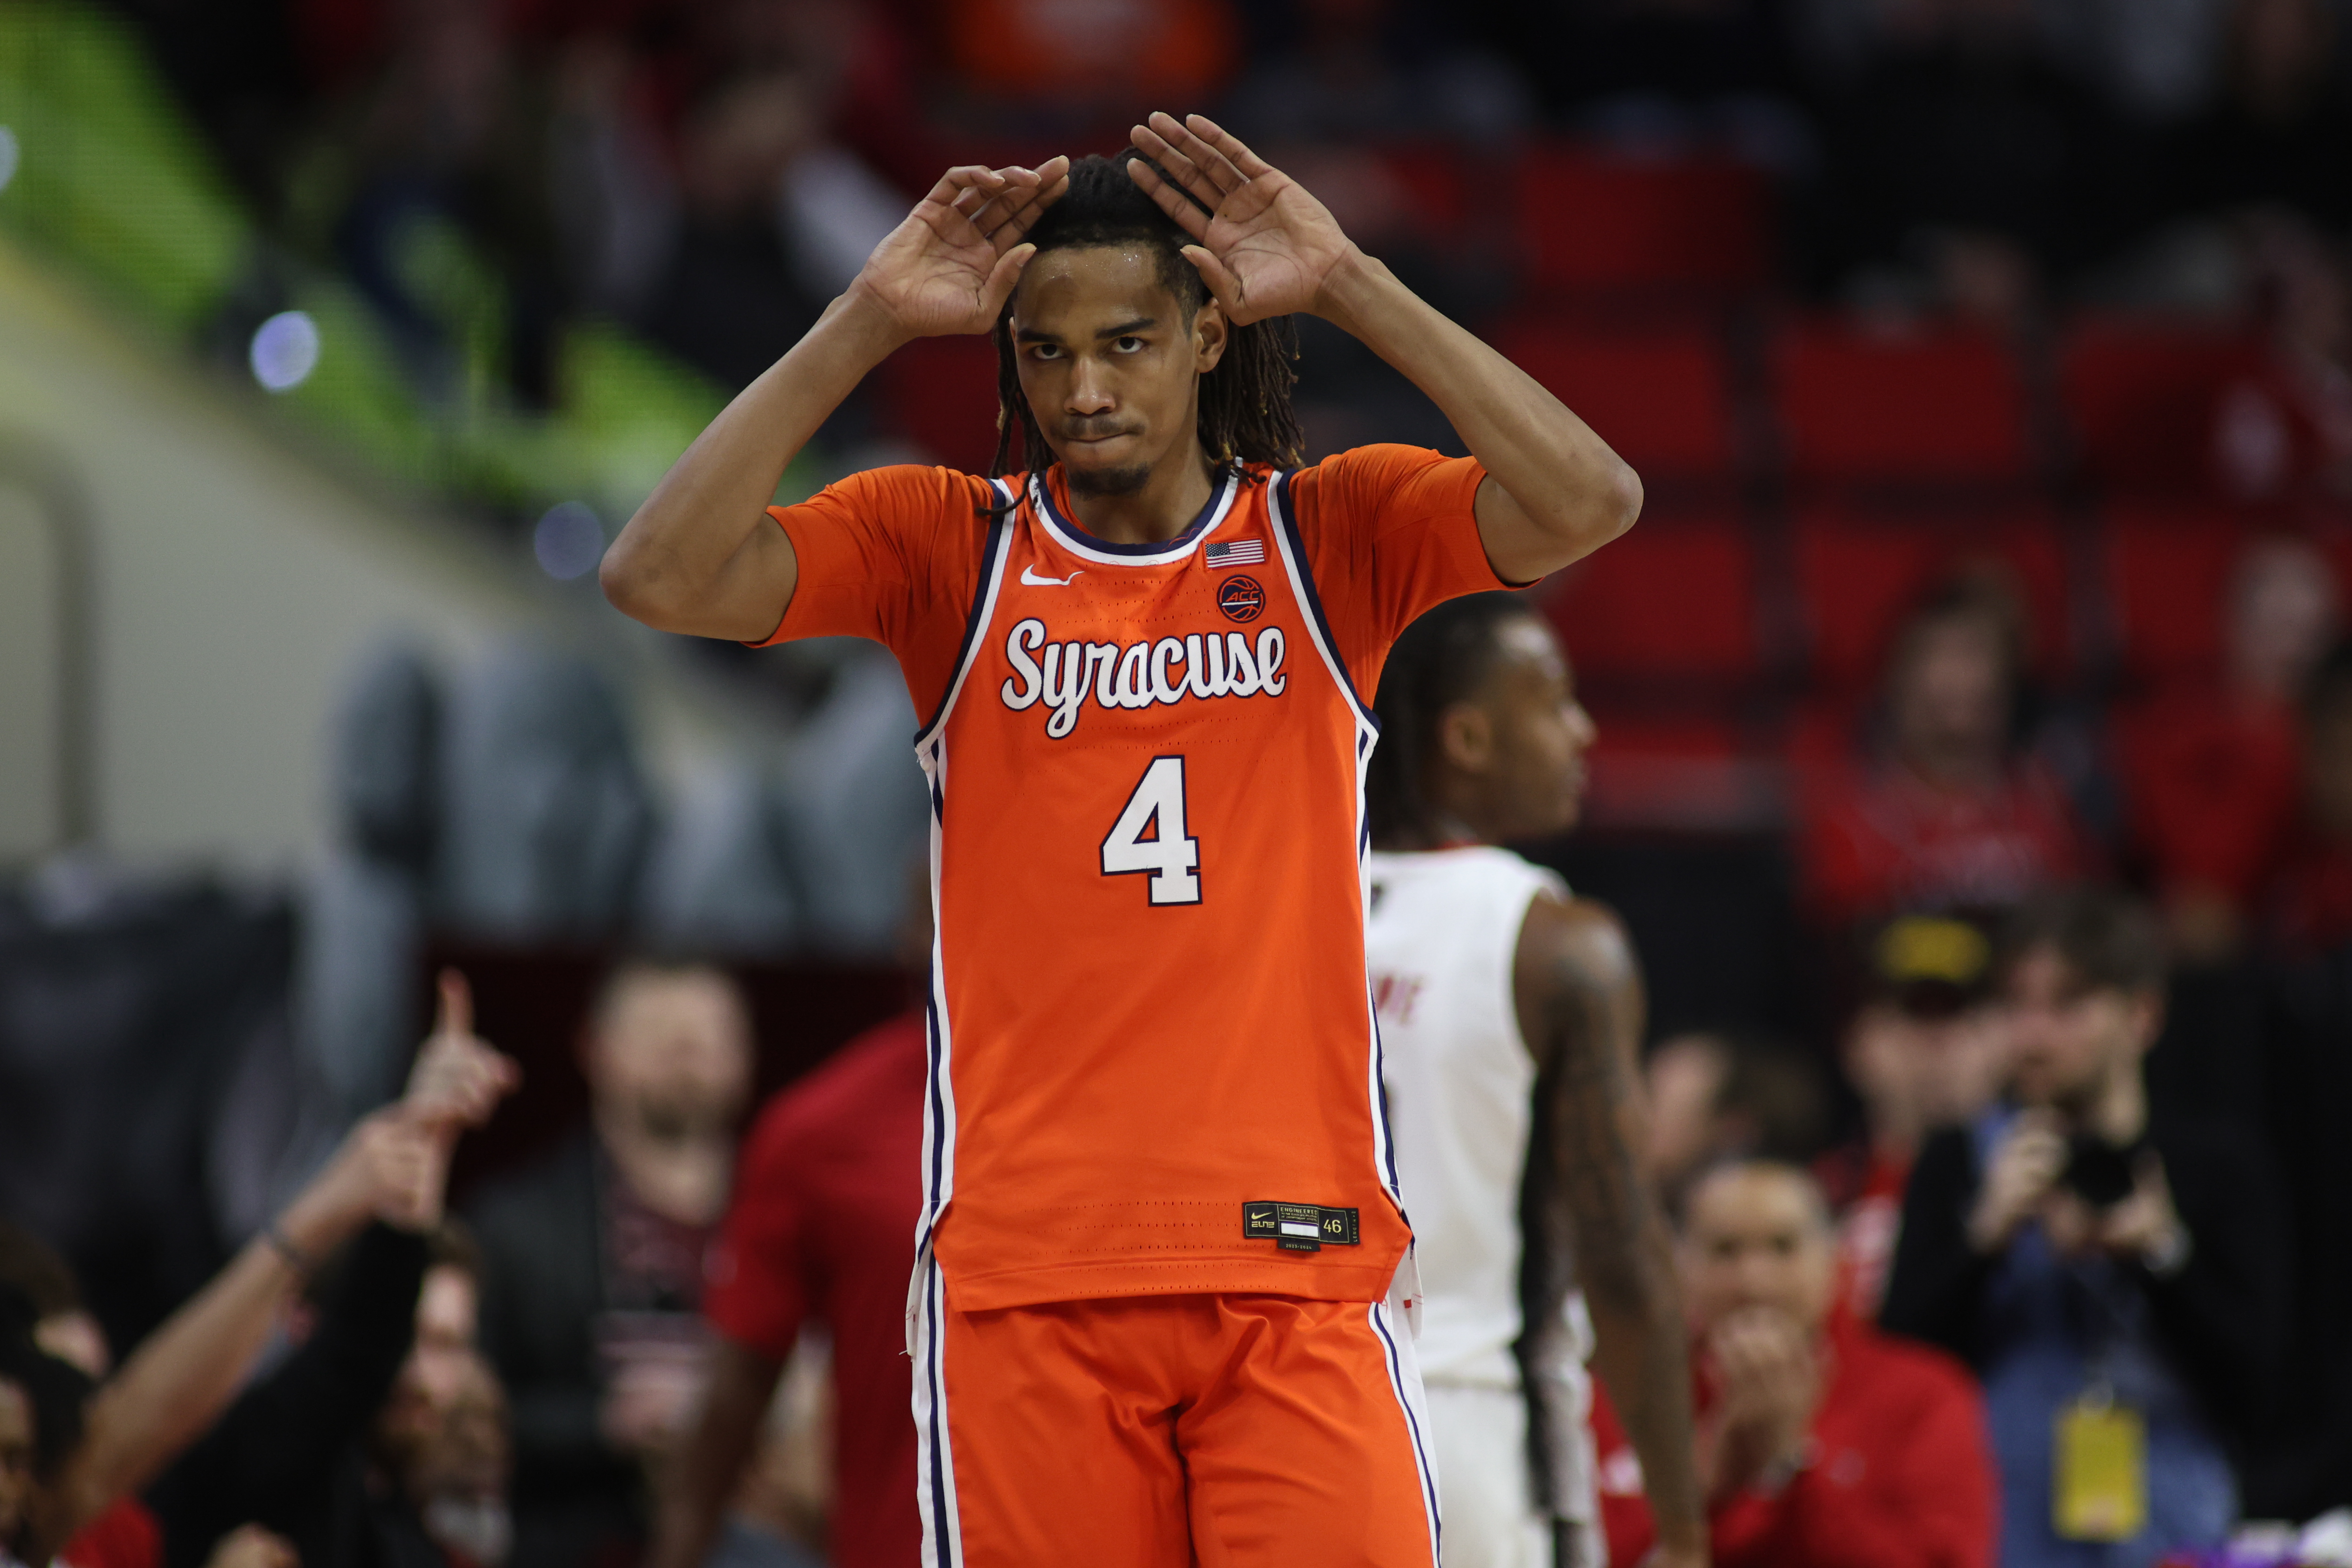 COLLEGE BASKETBALL: FEB 20 Syracuse at NC State